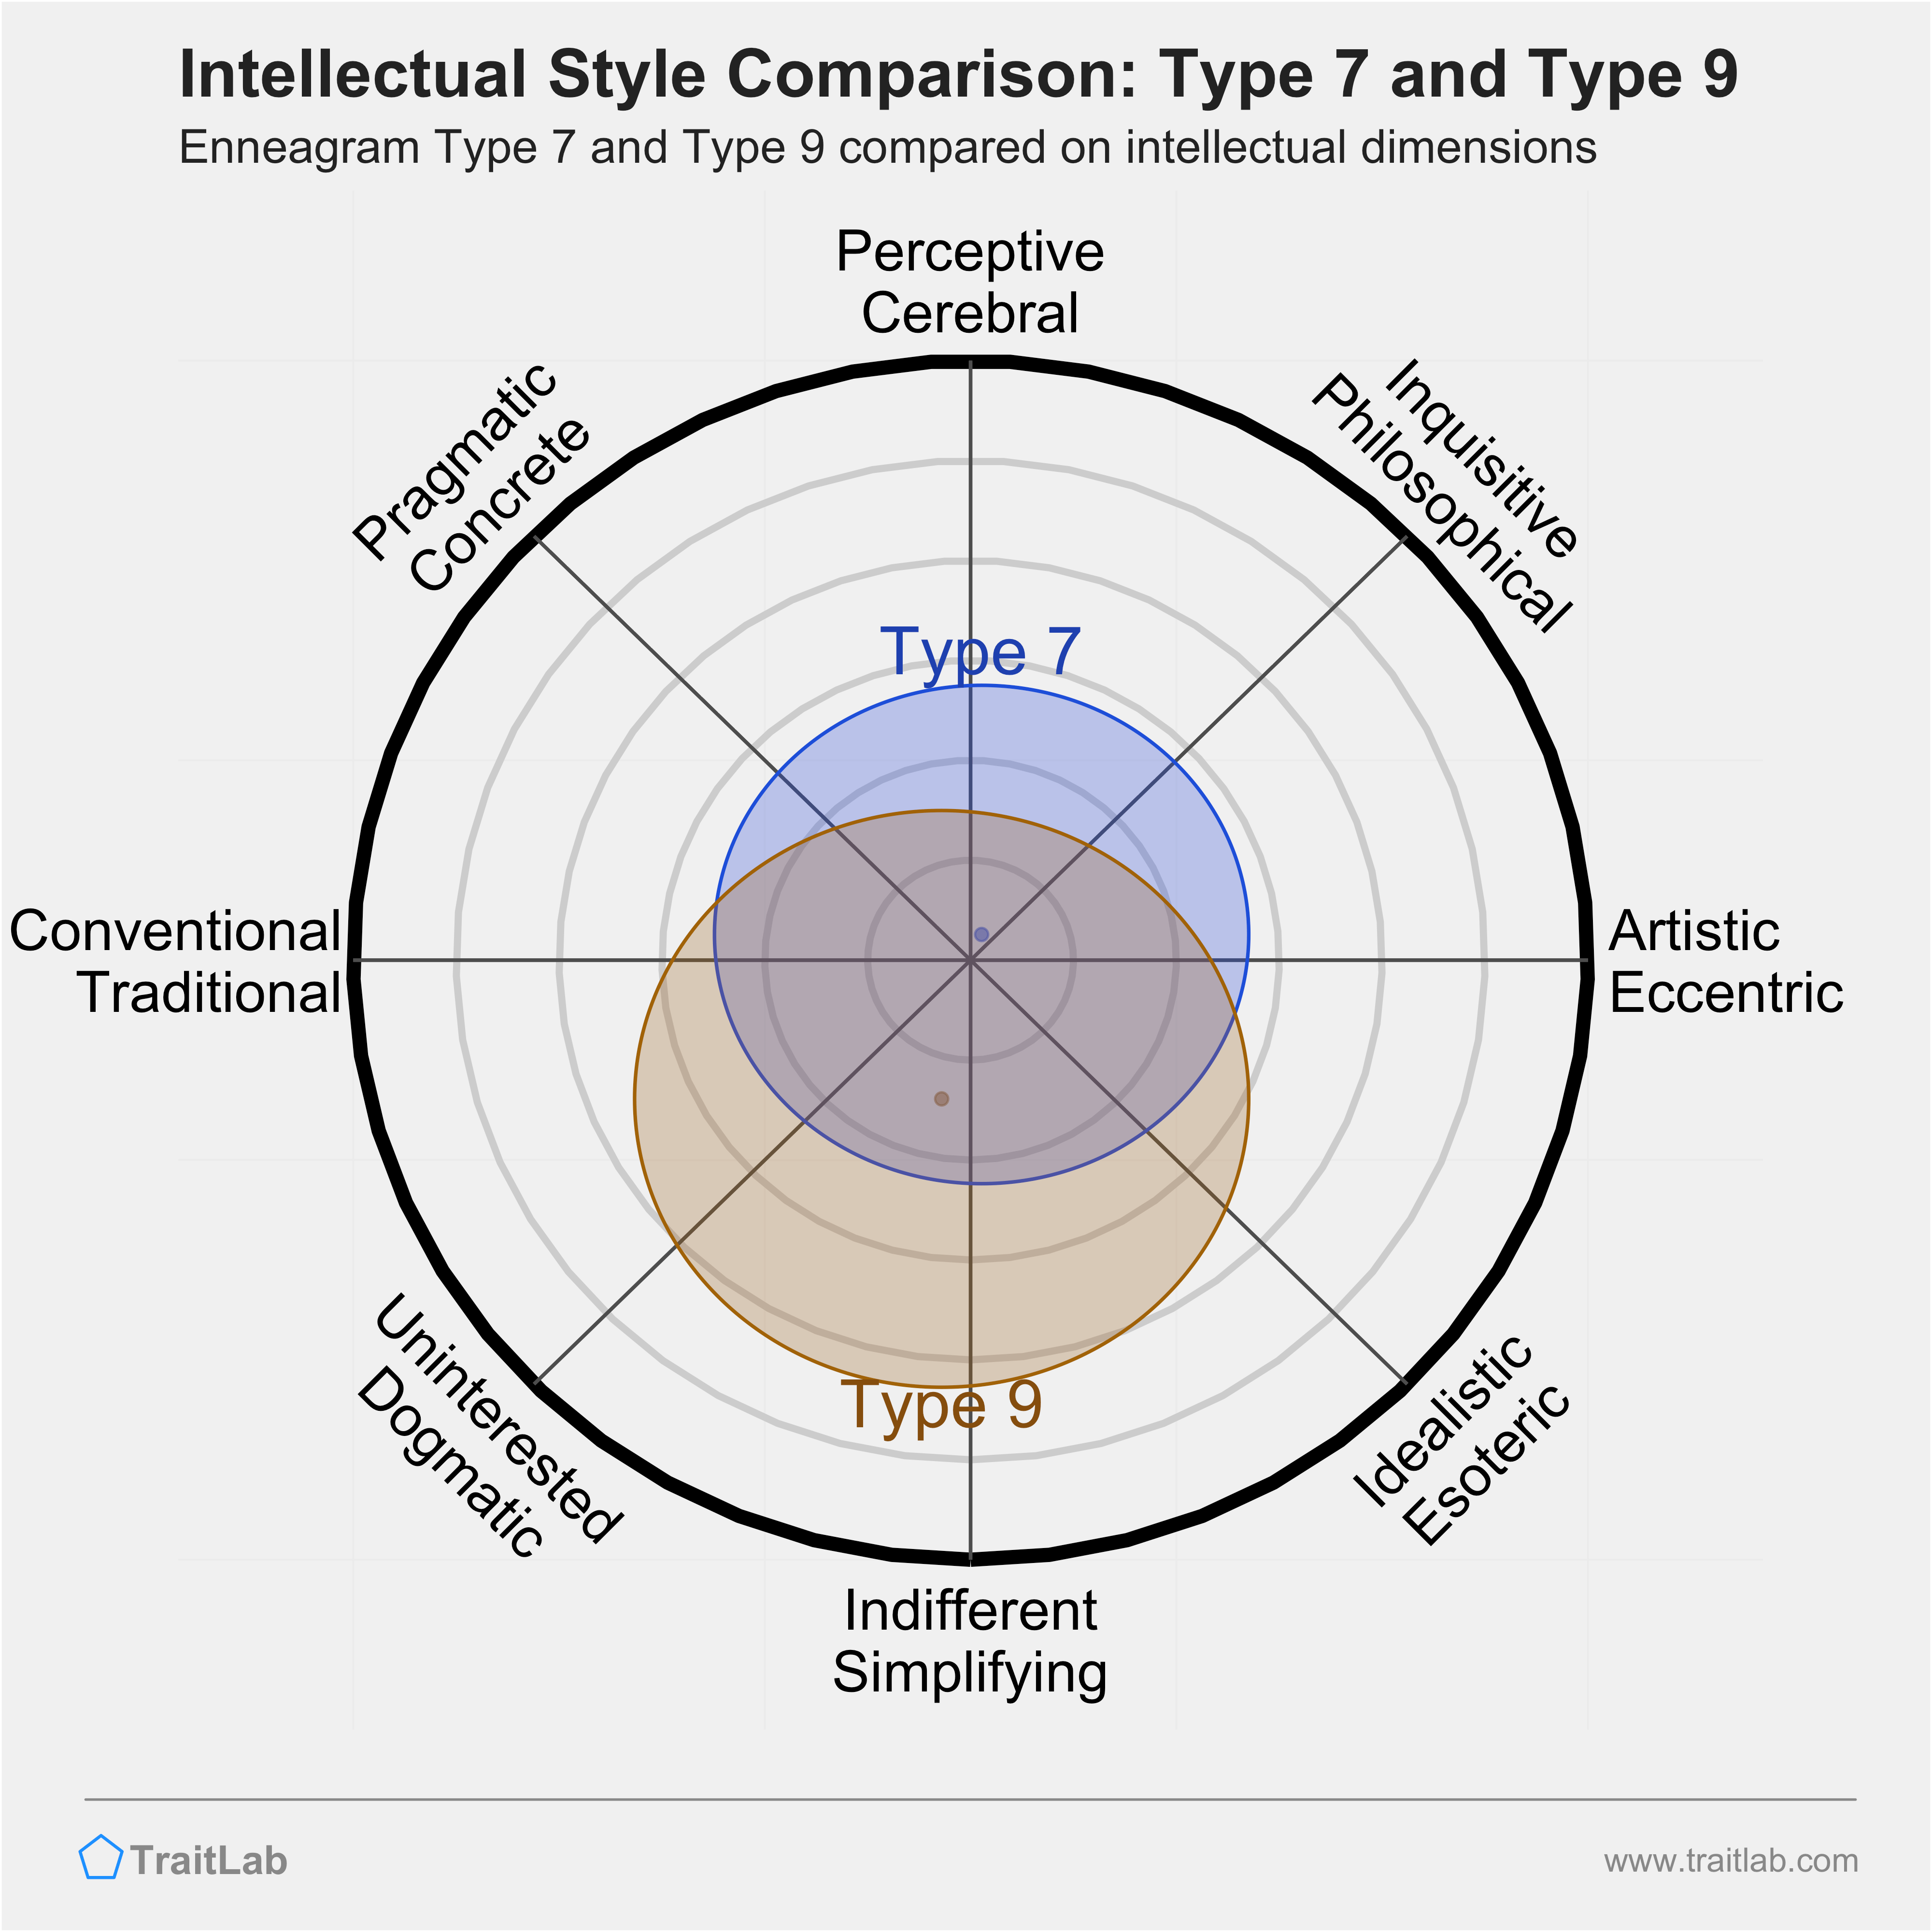 Type 7 and Type 9 comparison across intellectual dimensions